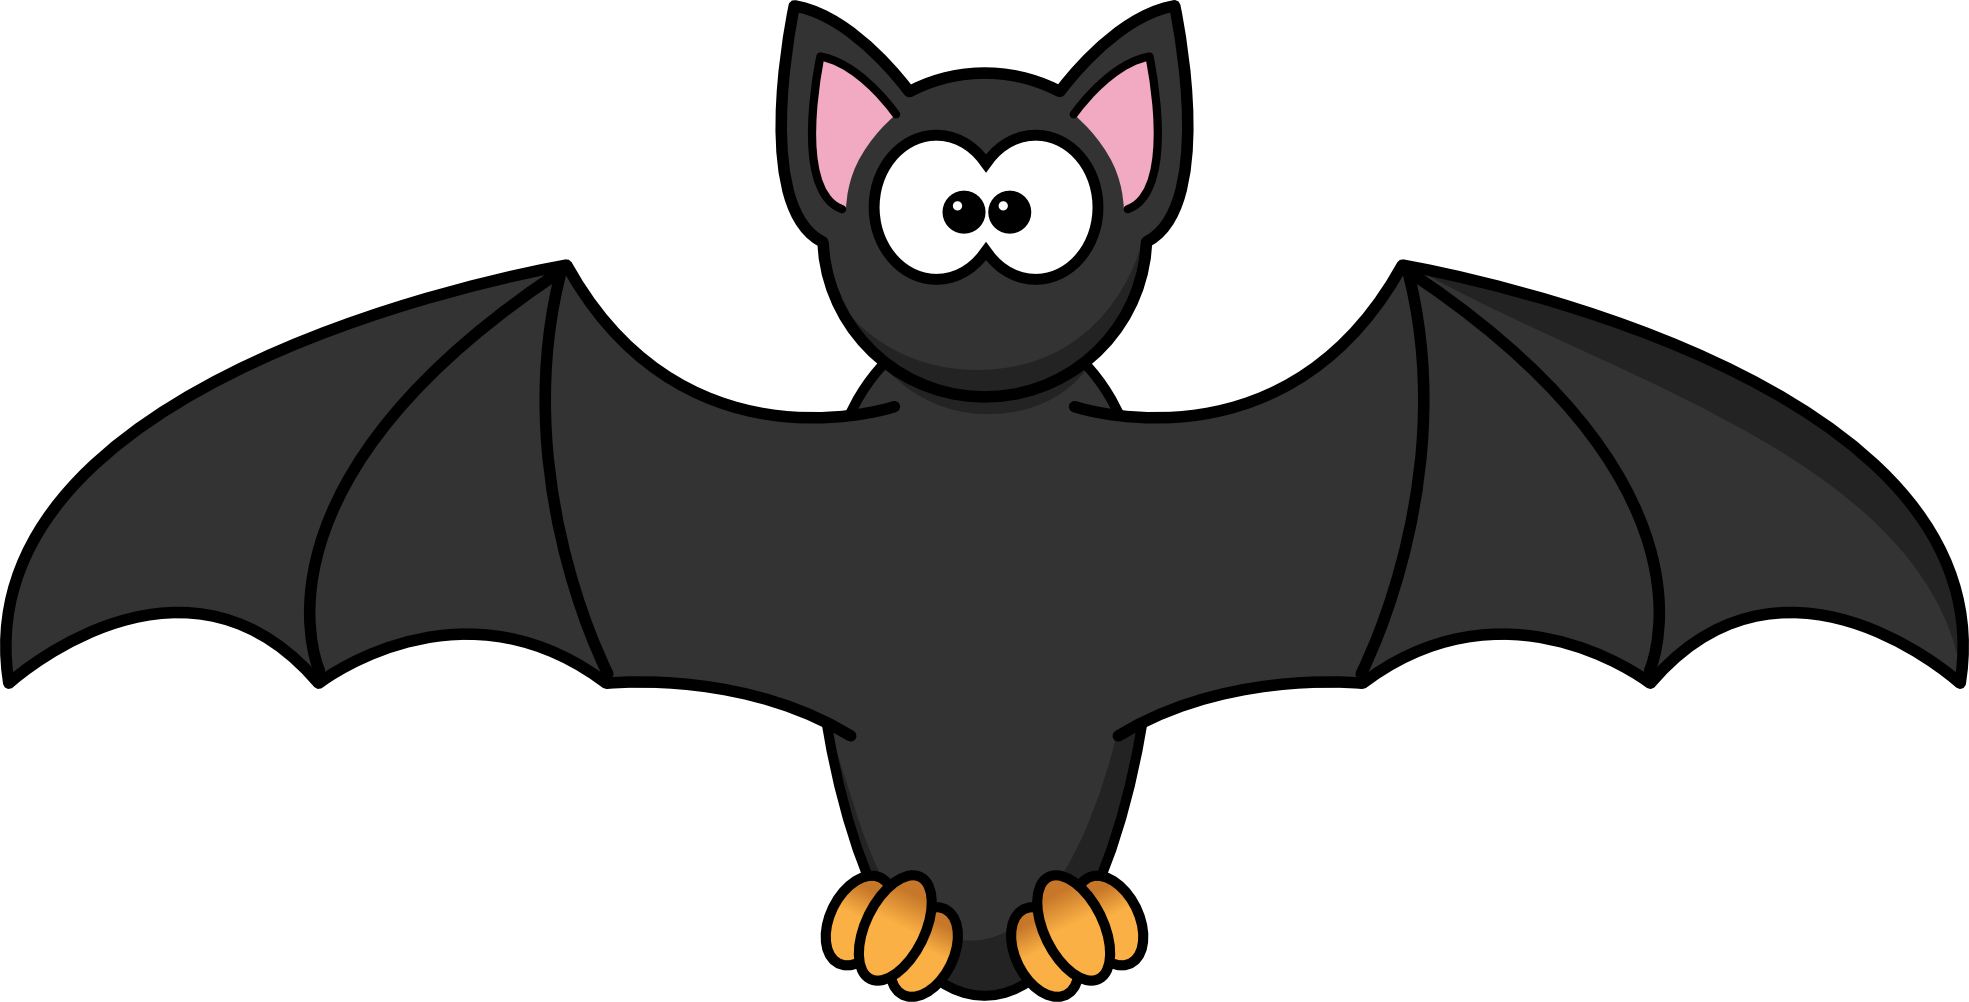 Bat With Wings Open Size: 48 